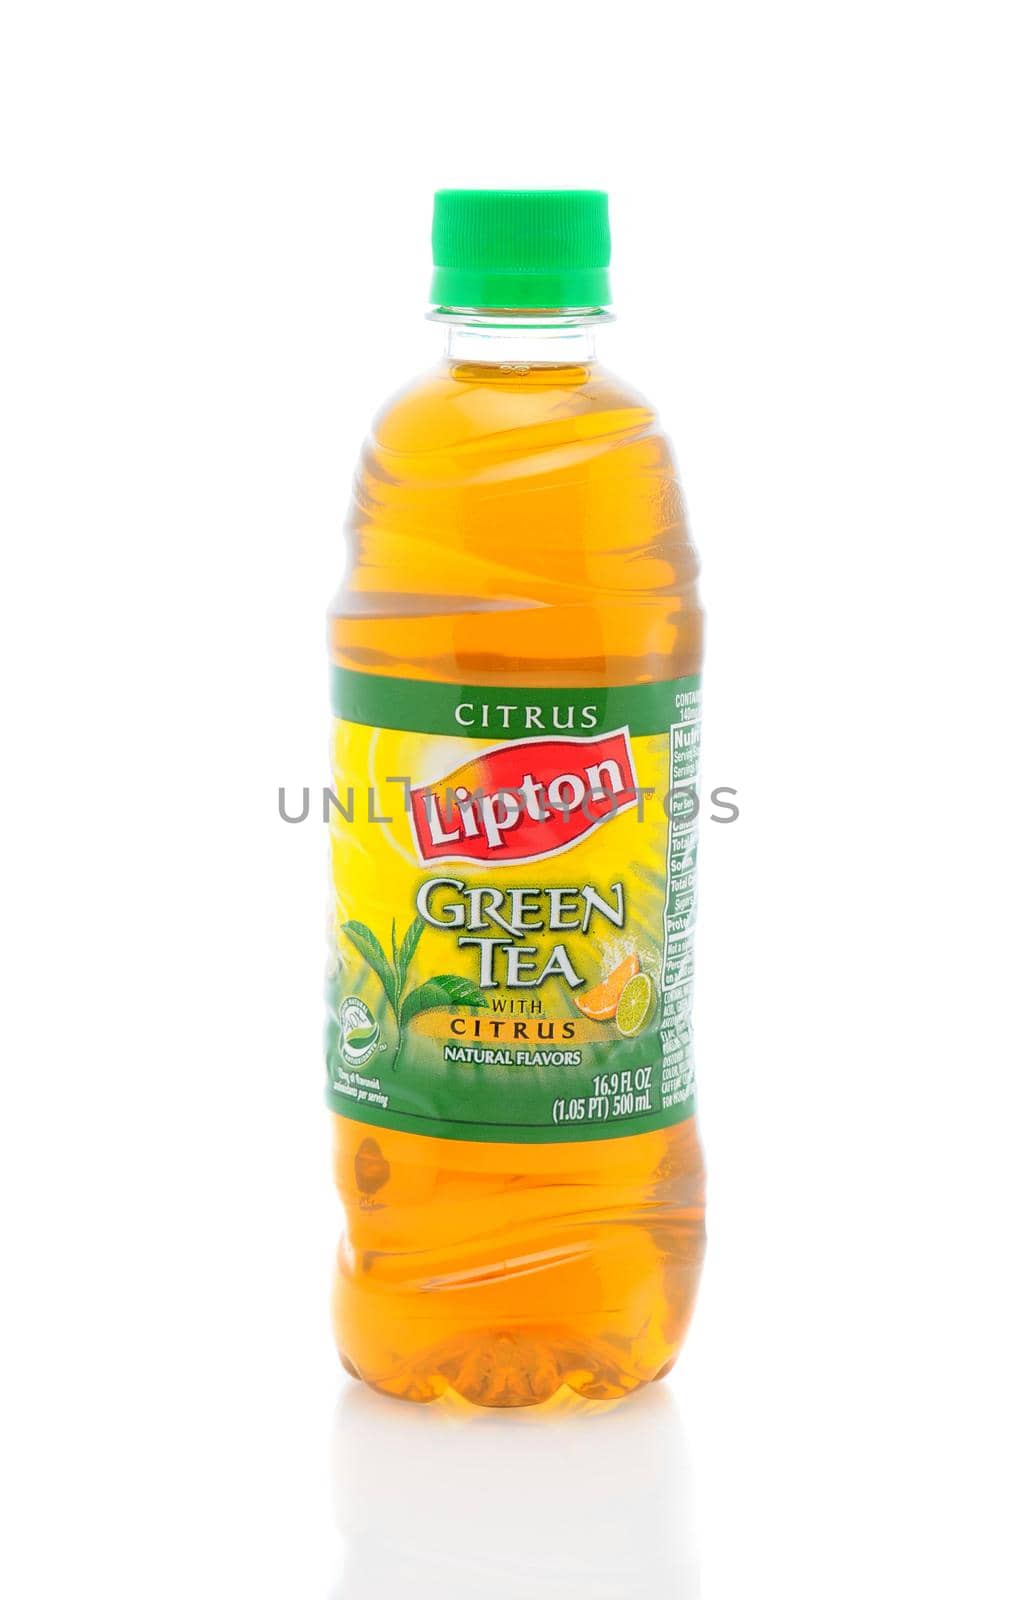 IRVINE, CA - January 11, 2013: A 500ml bottle of Lipton Green Tea with Citrus. Iced tea makes up about 85% of all tea consumed in the United States.